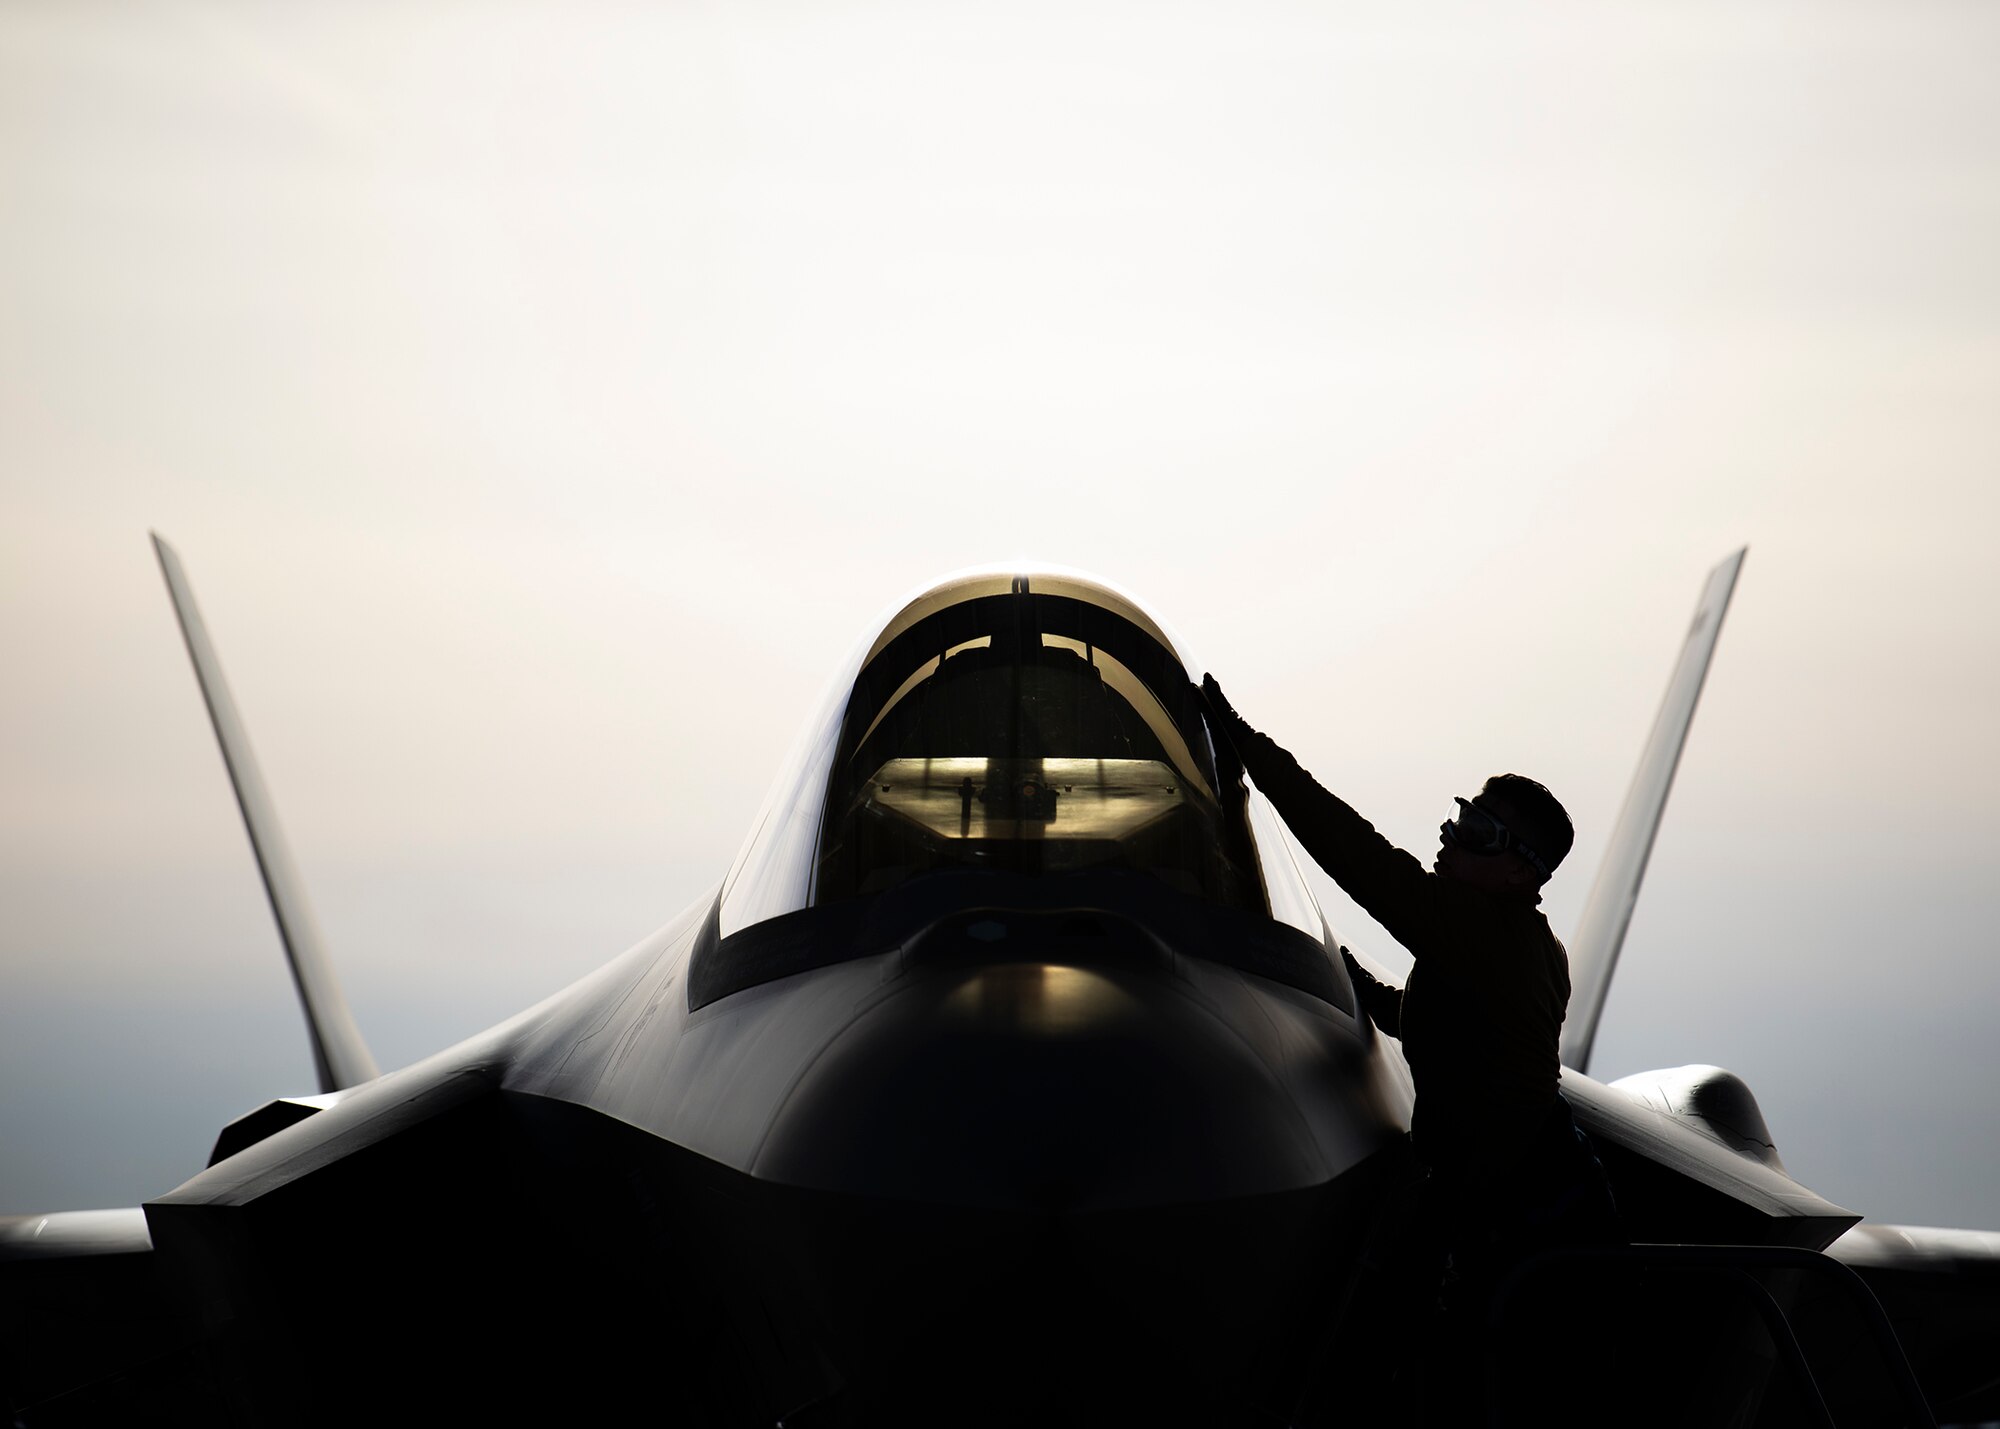 An Airman cleans the canopy of an F-35A Lighting II fighter jet.